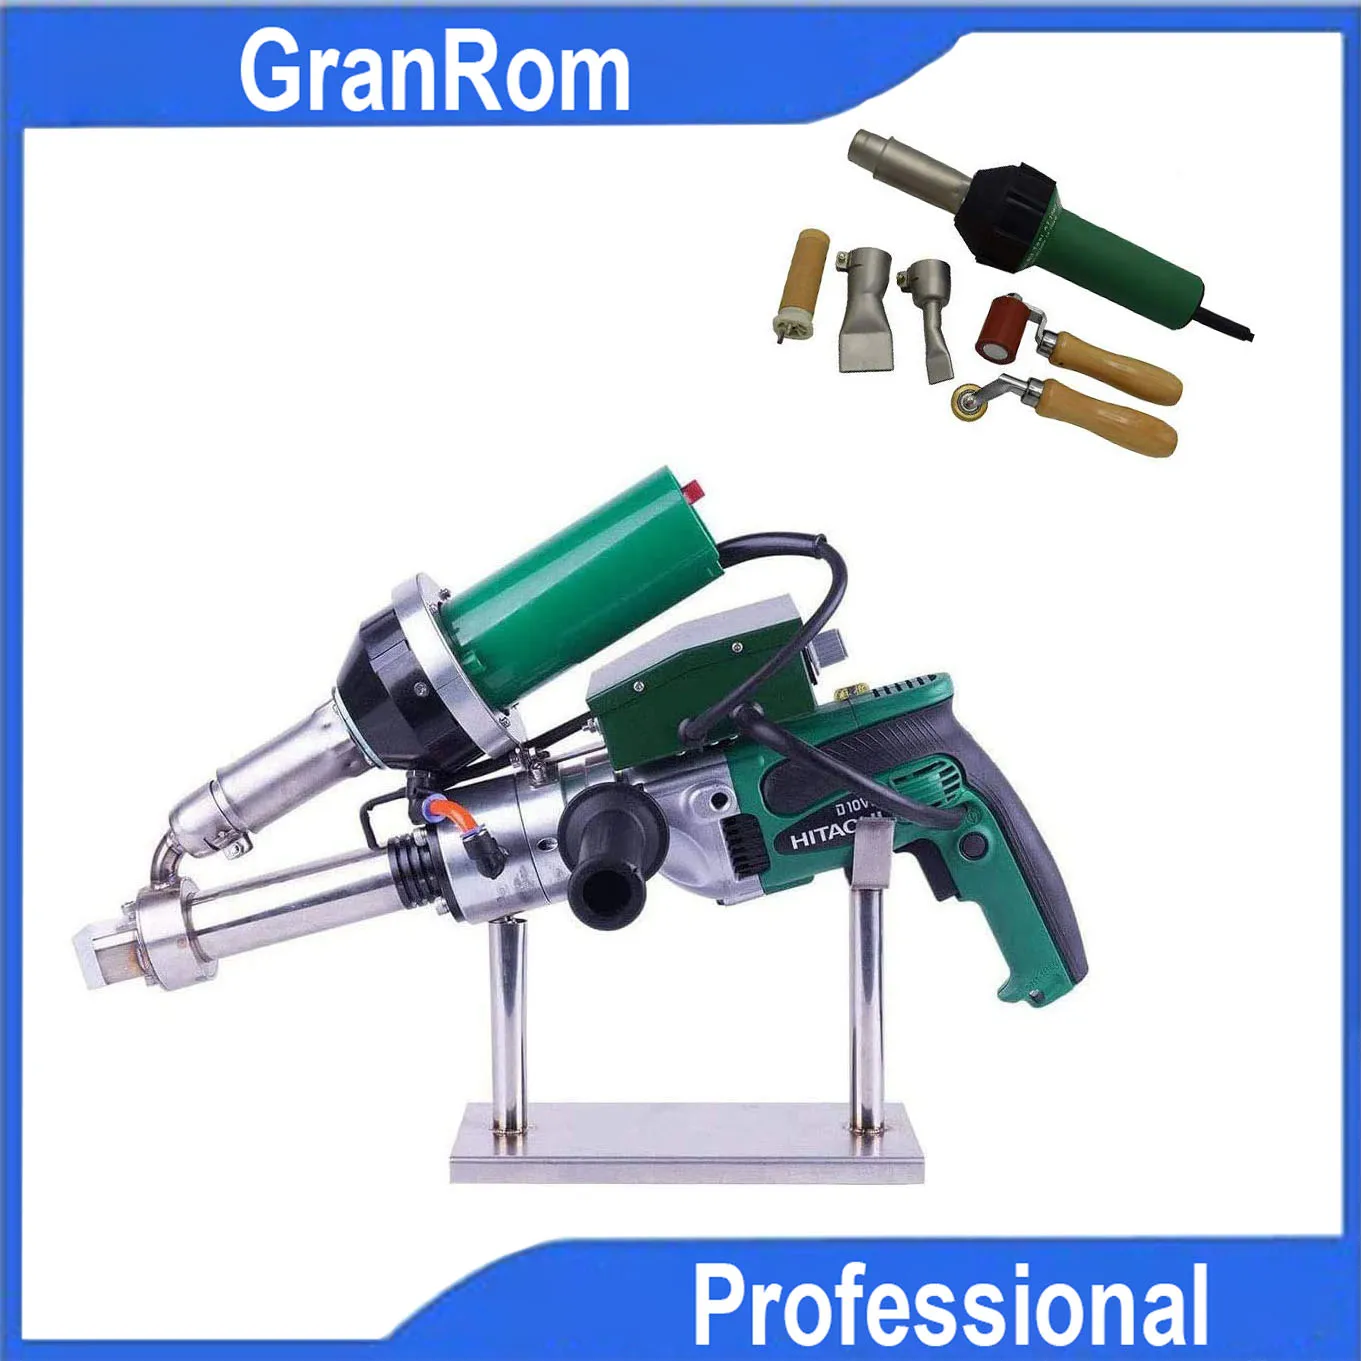 

Professional 1600W Plastic Extruder Welder Hand Extrusion Welding Machine with Heat Gun Kit PVC PP HDPE LDPE Pipe with Air Torch